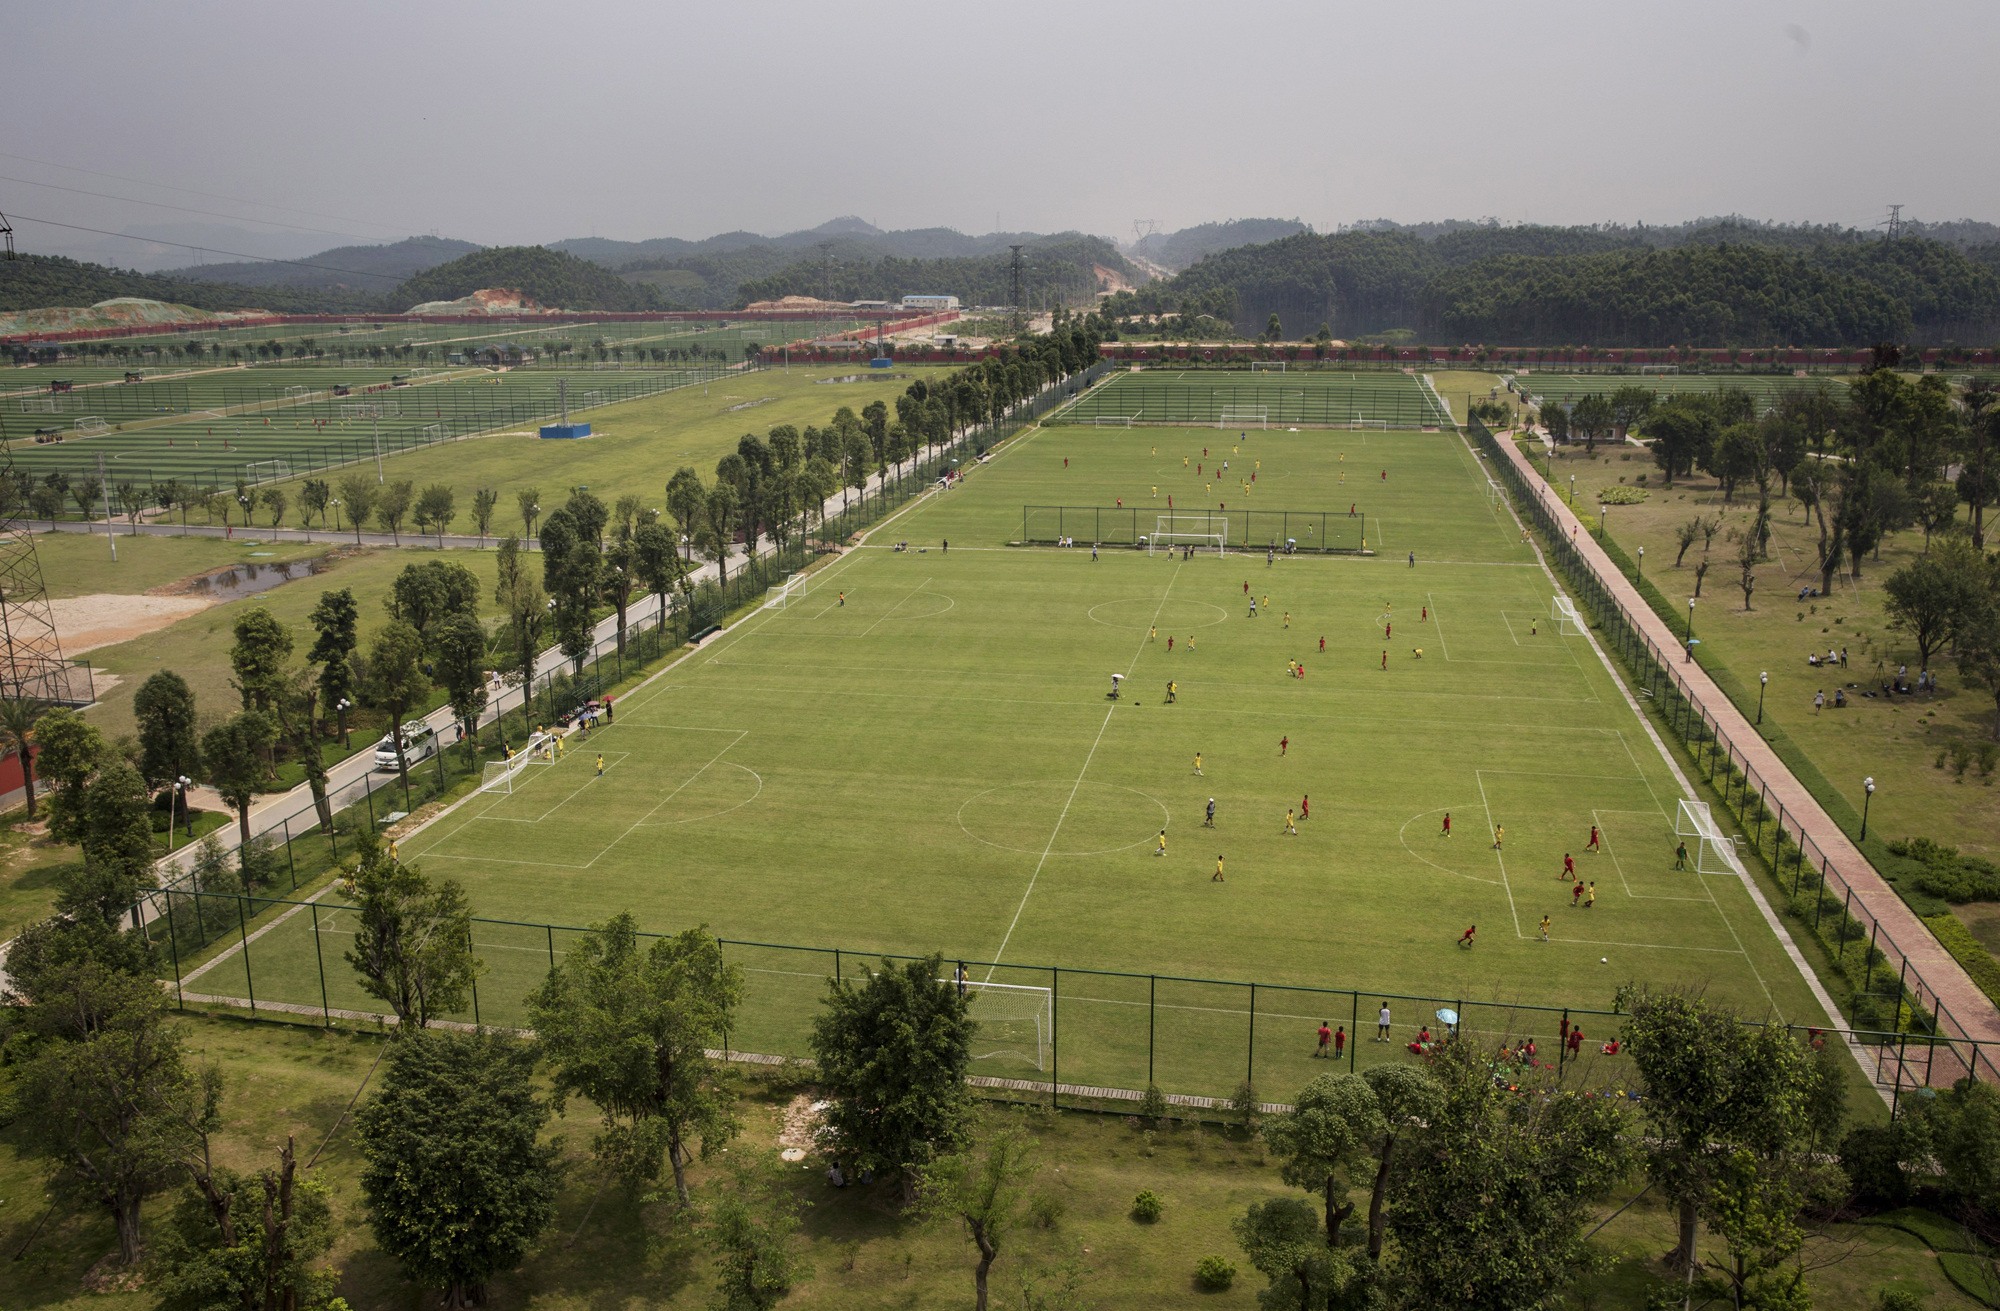 A view of some of the 50 pitches at the at the Evergrande International Football School on June 14 near Qingyuan in Guangdong Province.